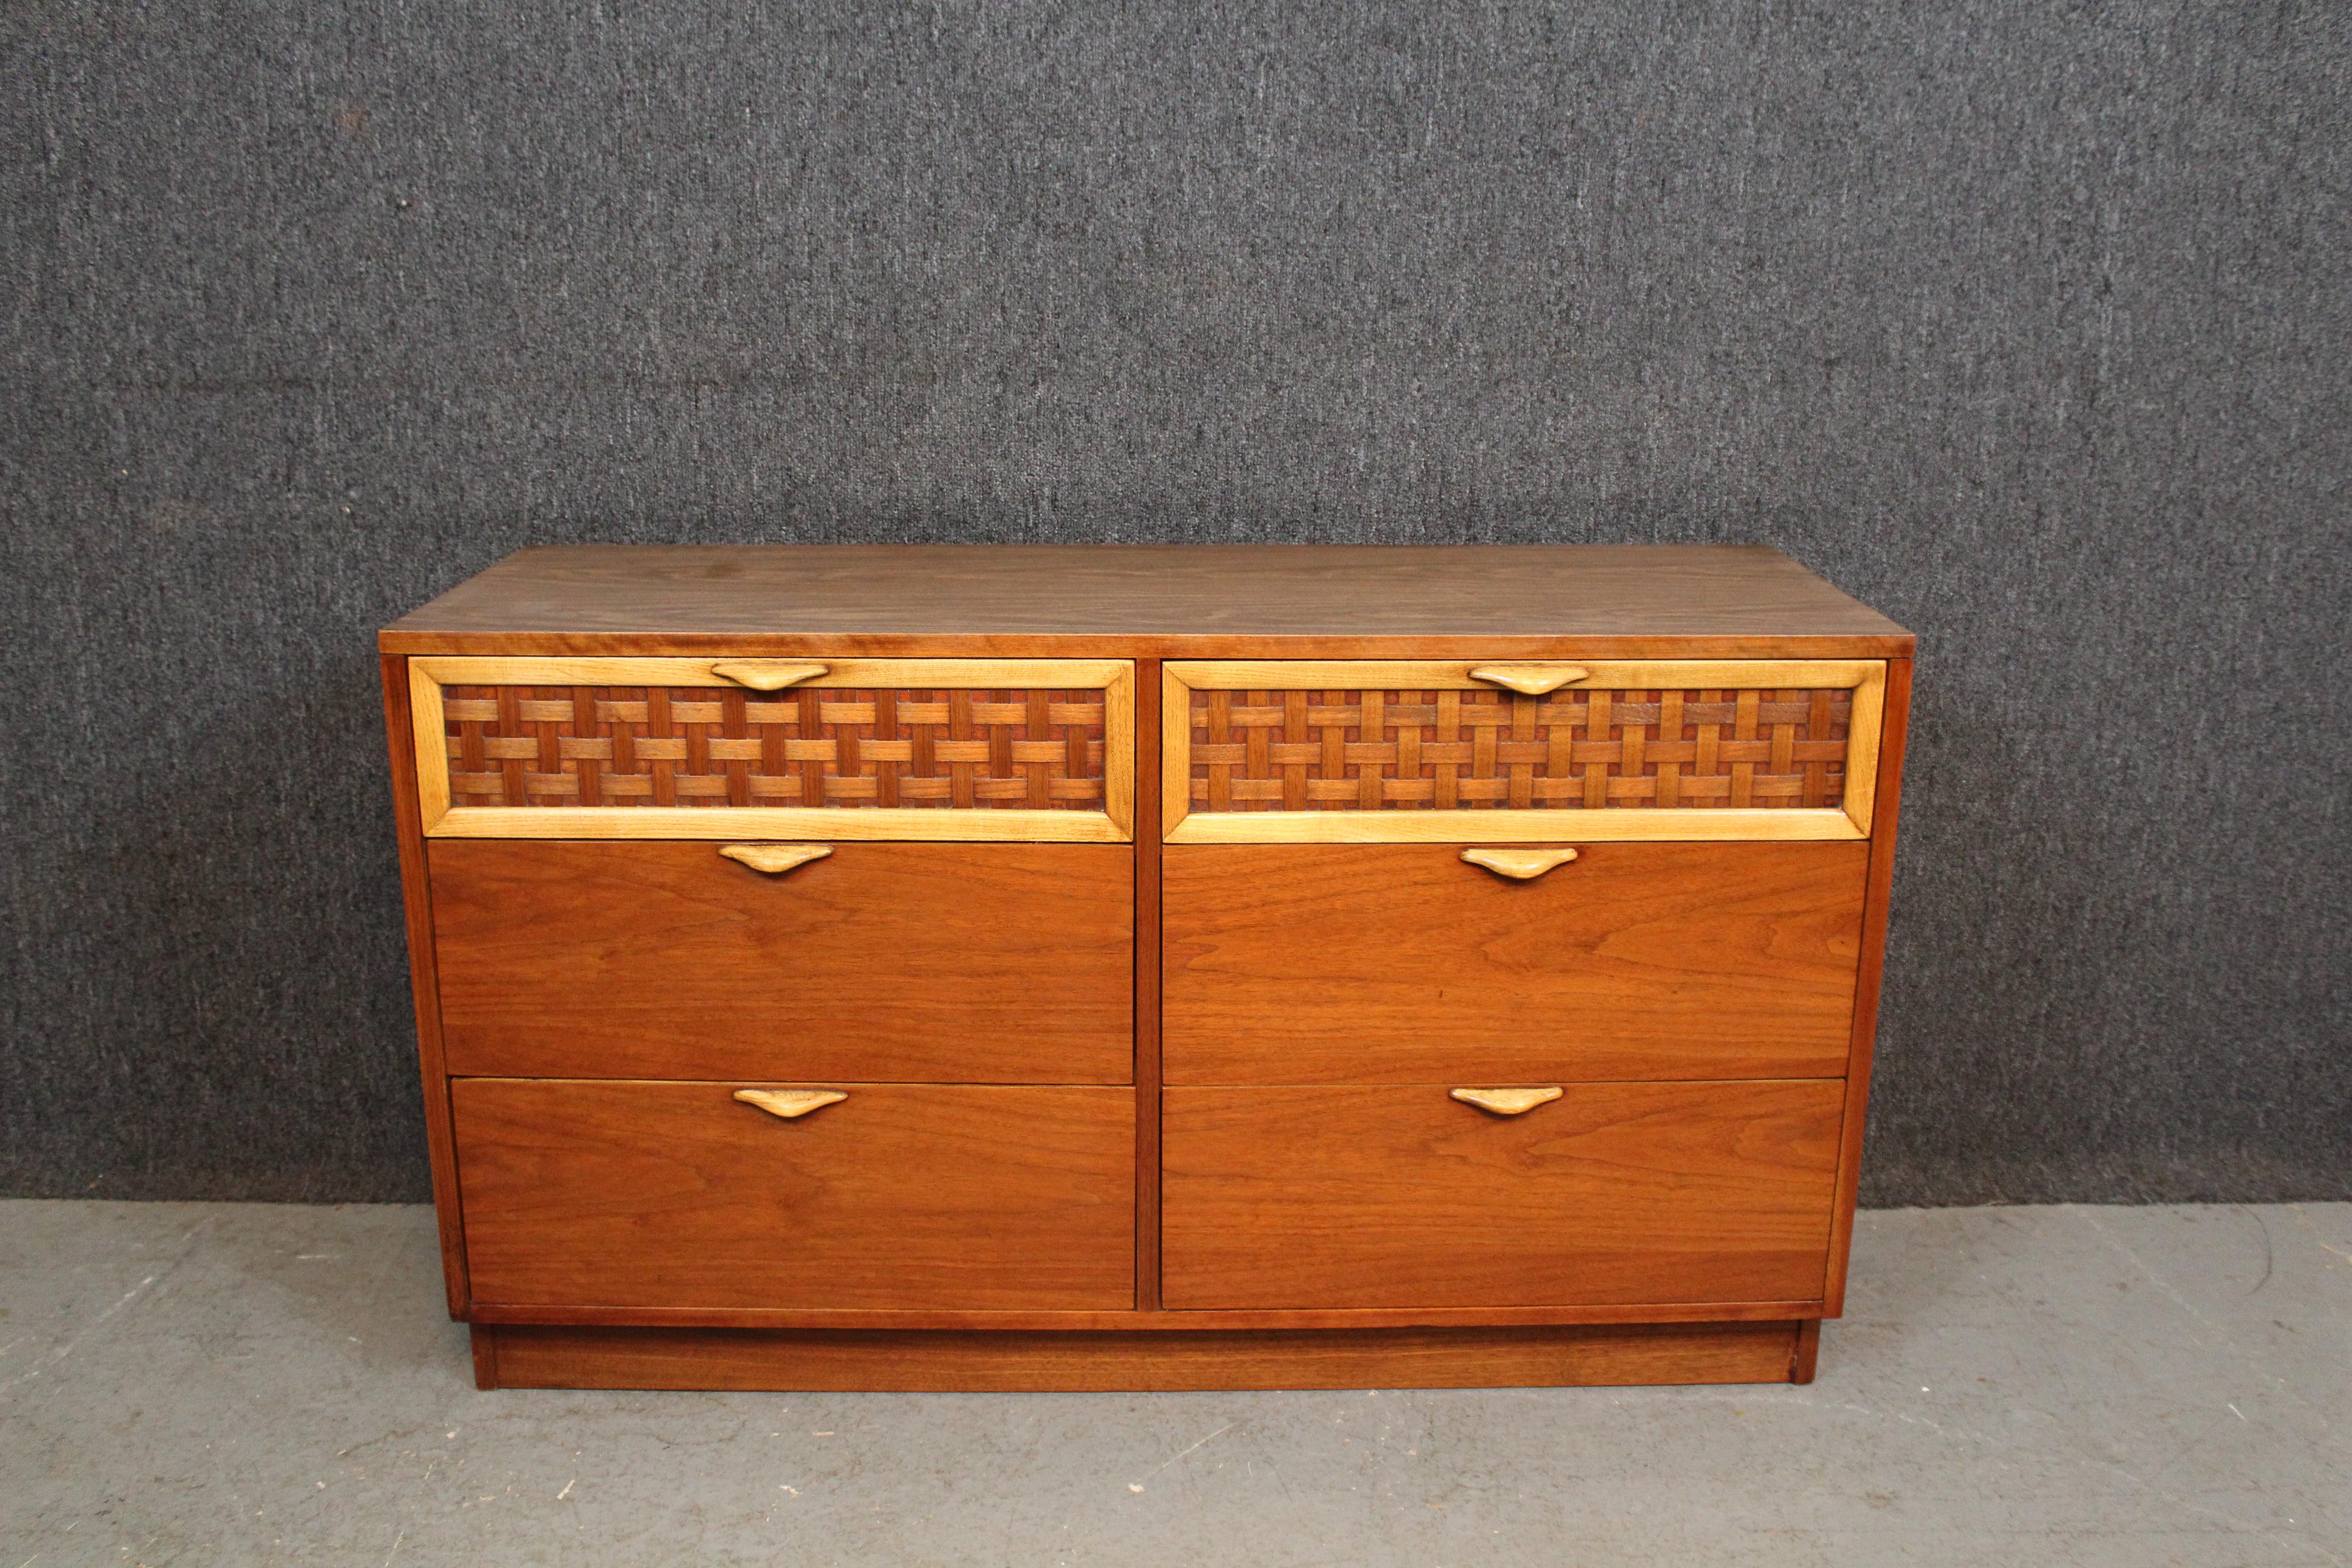 Elevate any space with iconic American Mid-Century Modernism! This unusual dresser from Lane Furniture's renowned 